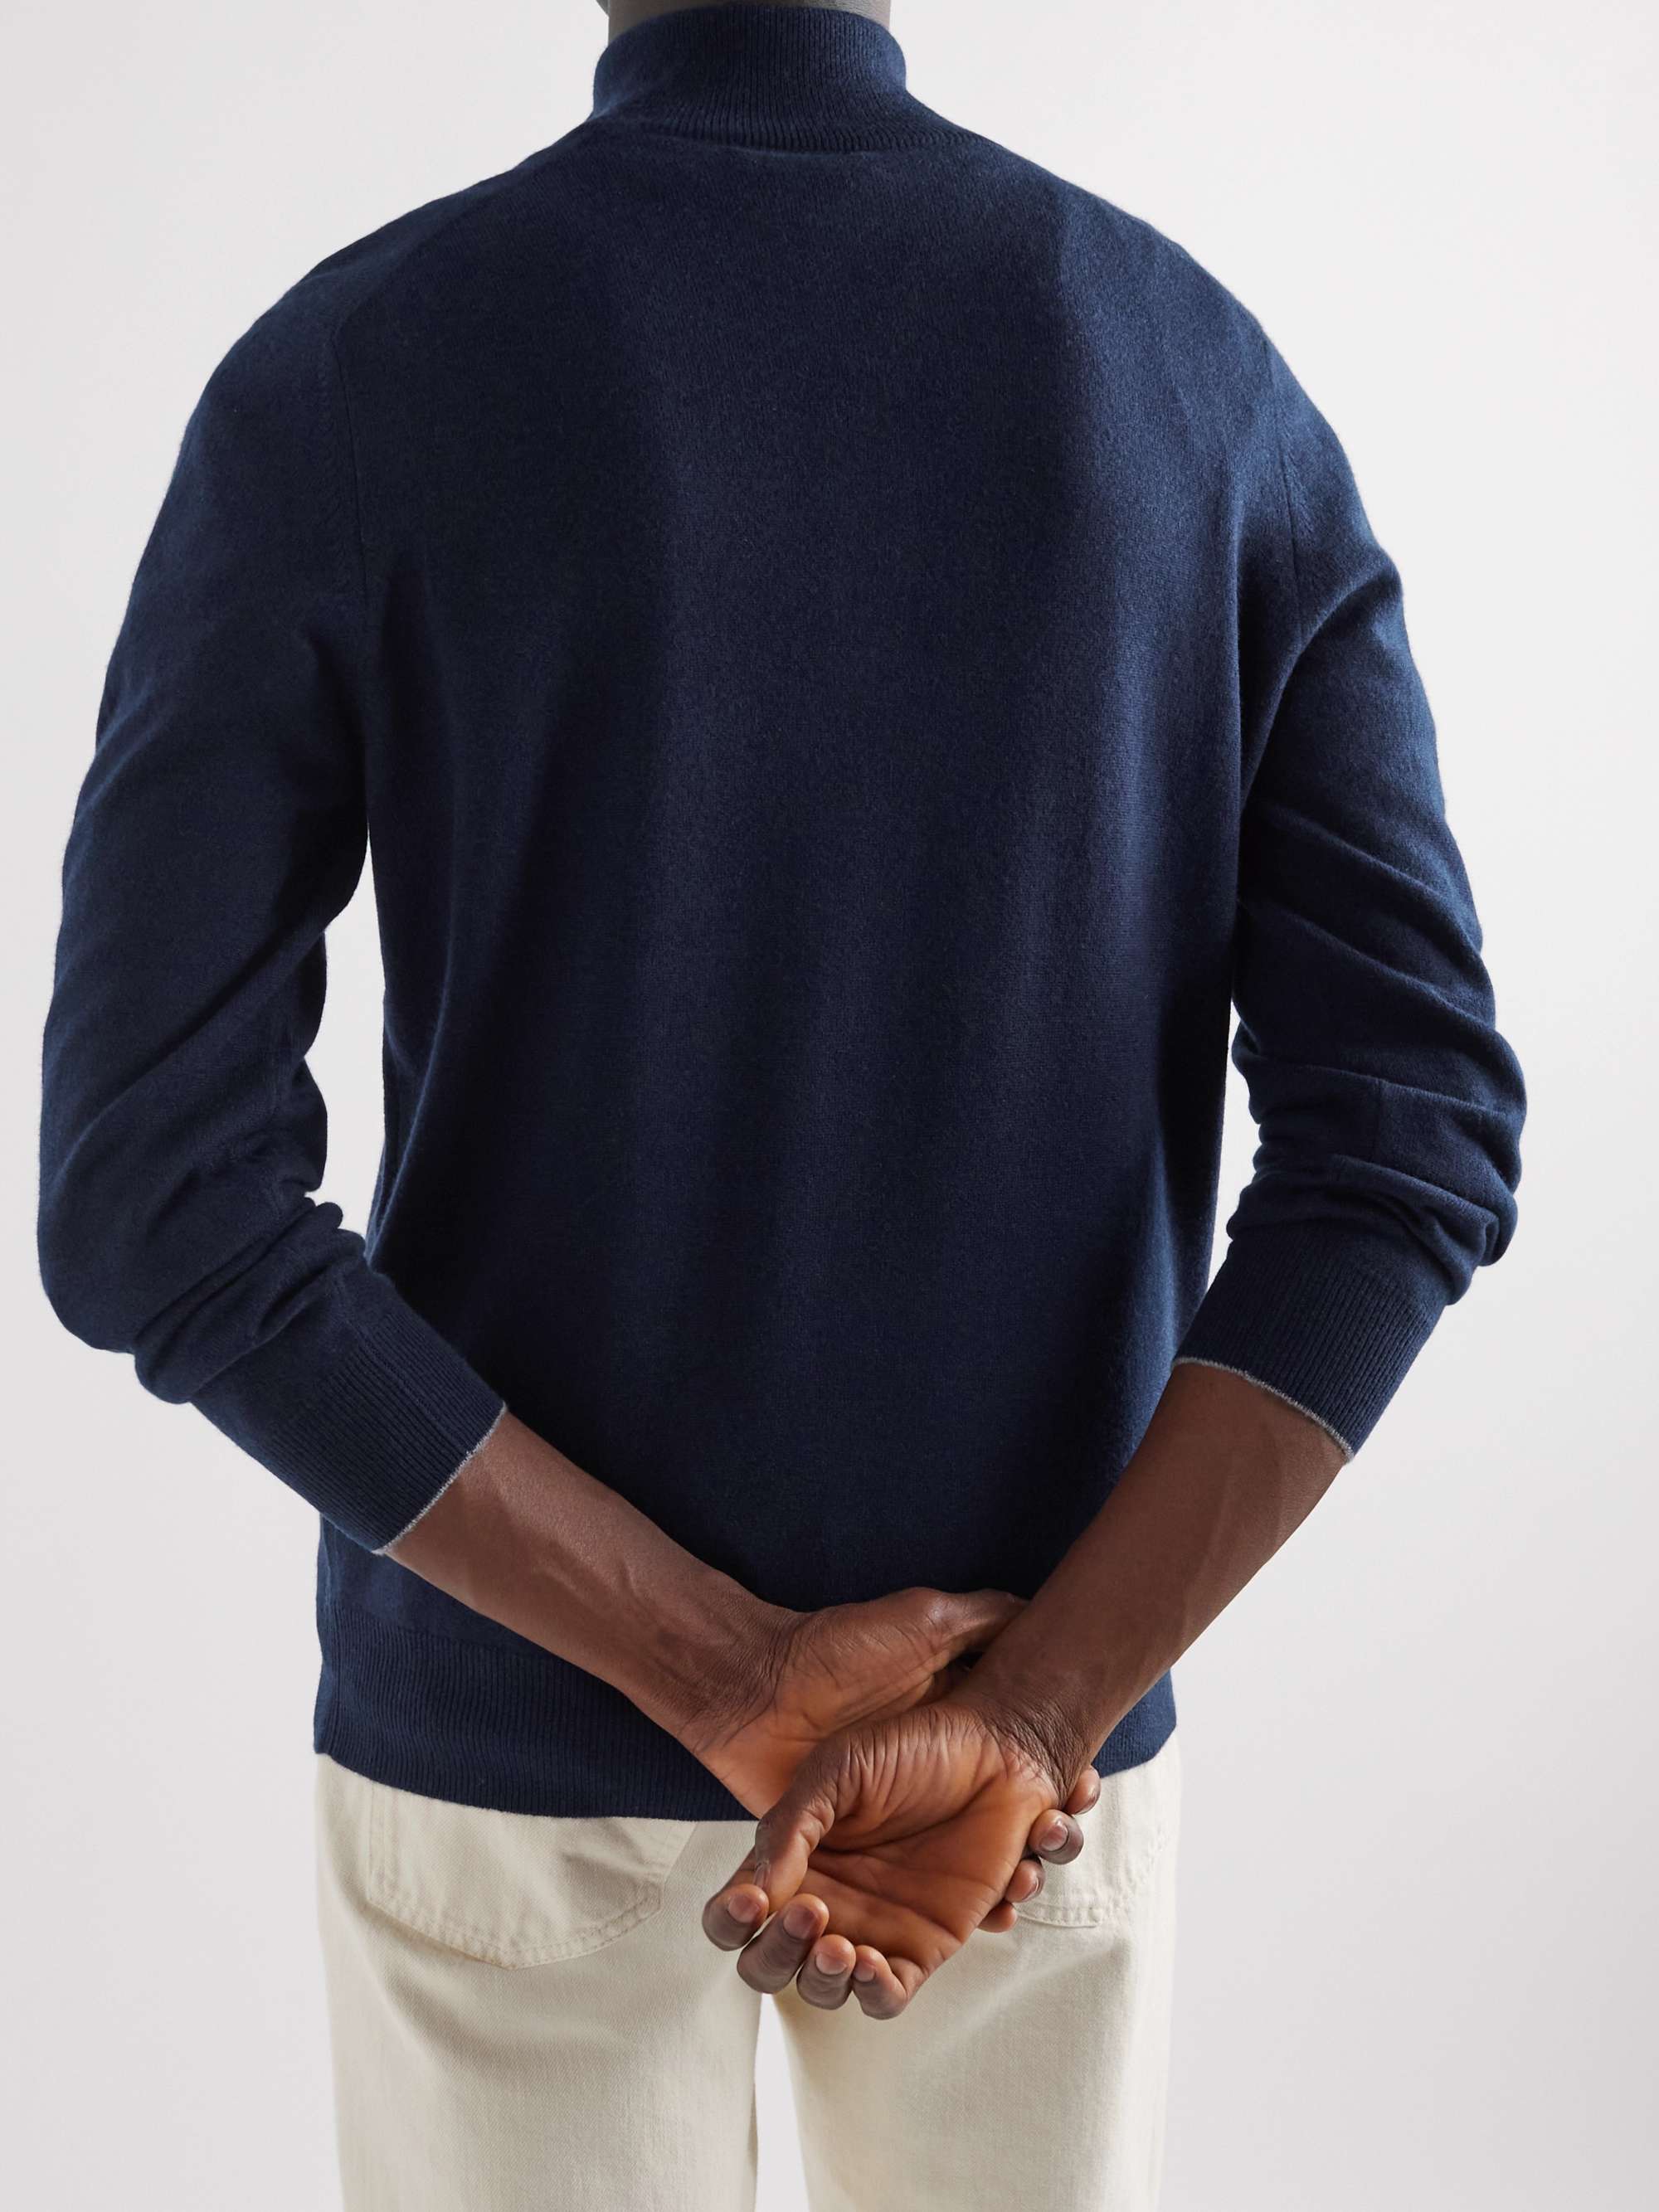 Brunello Cucinelli Cashmere Half-zip Sweater in Blue for Men Mens Clothing Sweaters and knitwear Zipped sweaters 